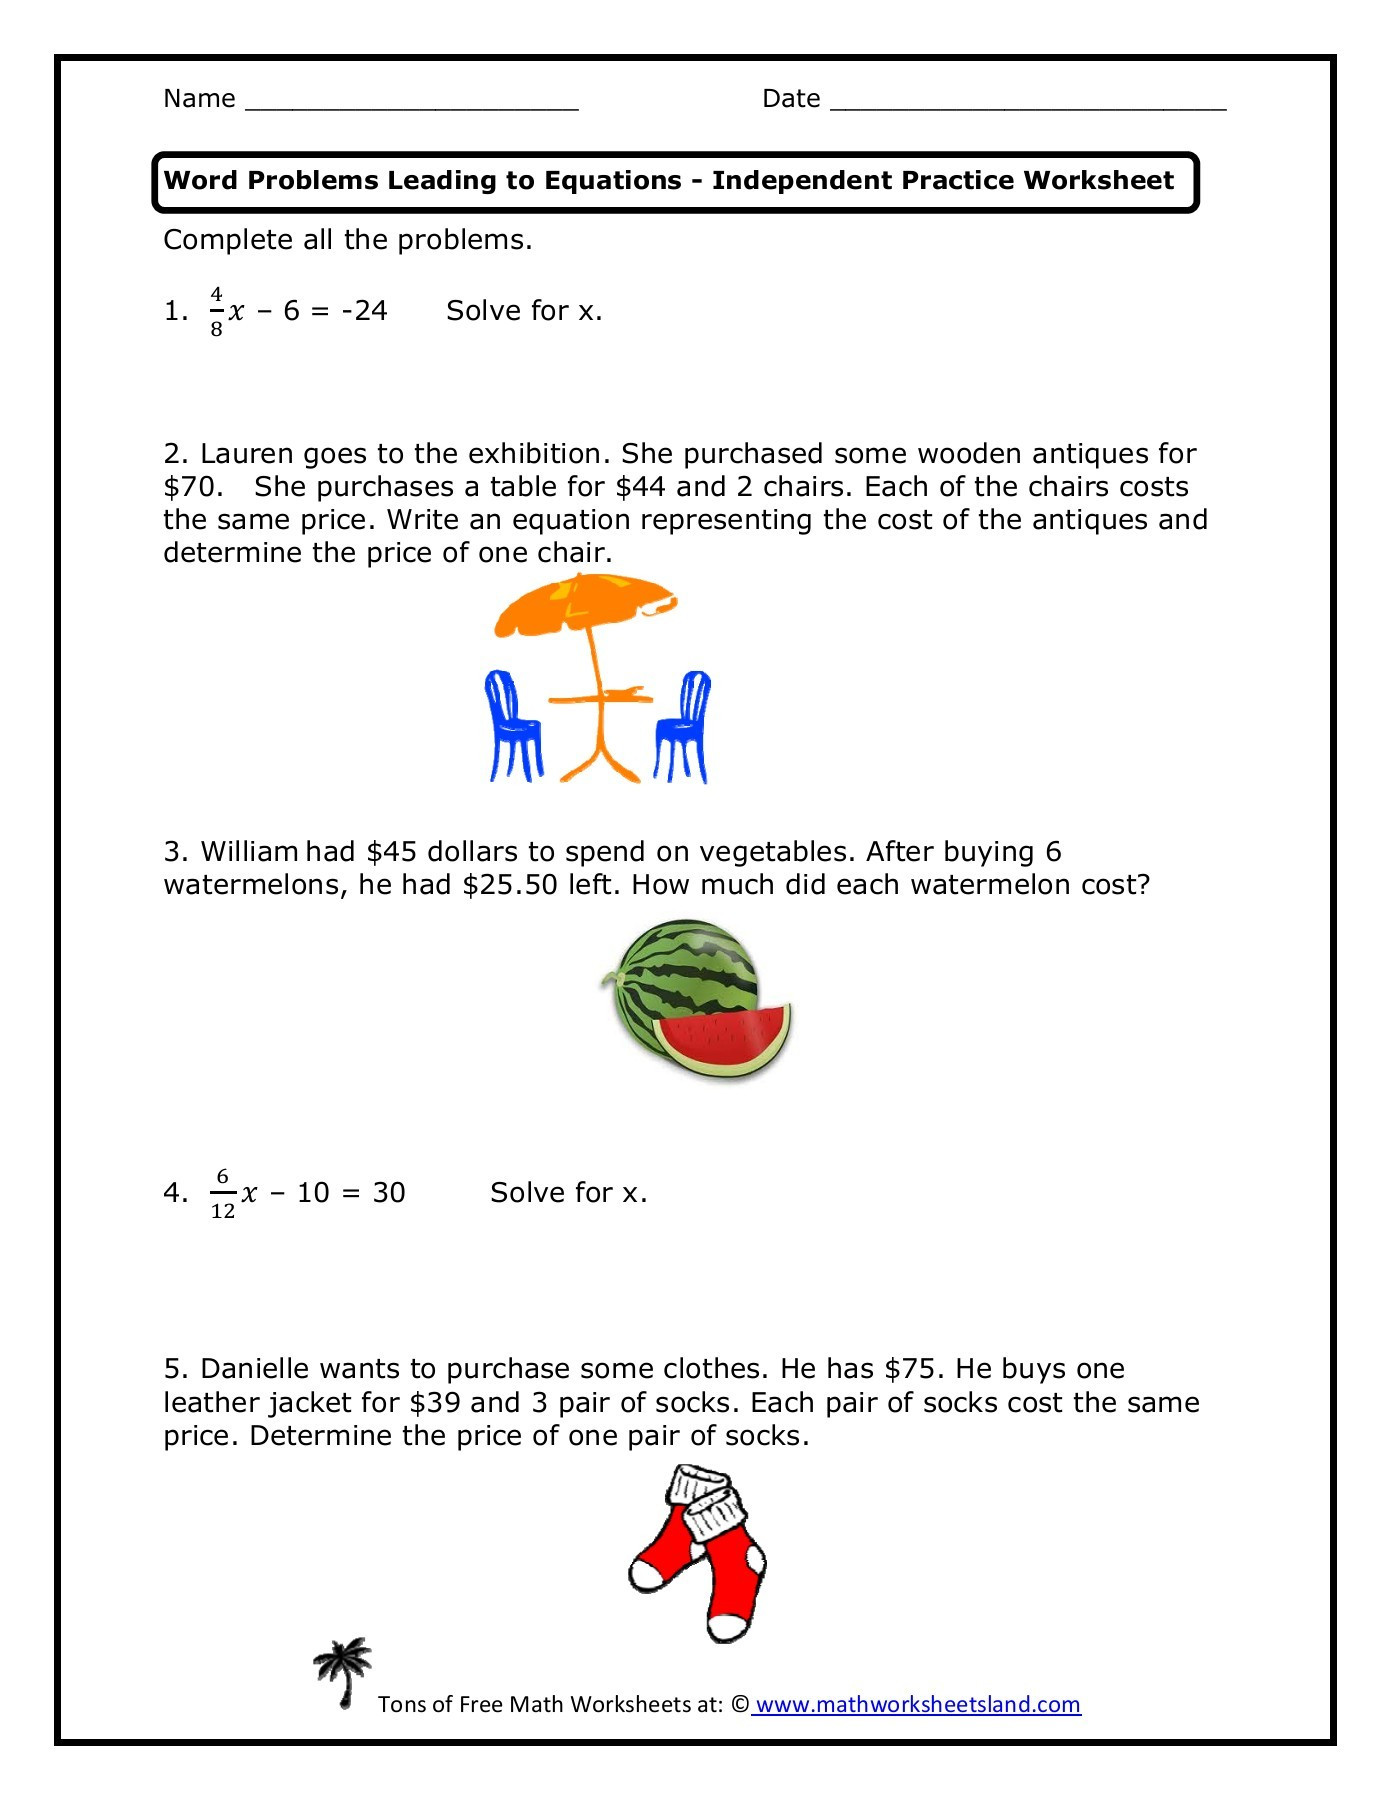 Solving Equations Word Problems Worksheet Word Problems Leading to Equations Independent Practice